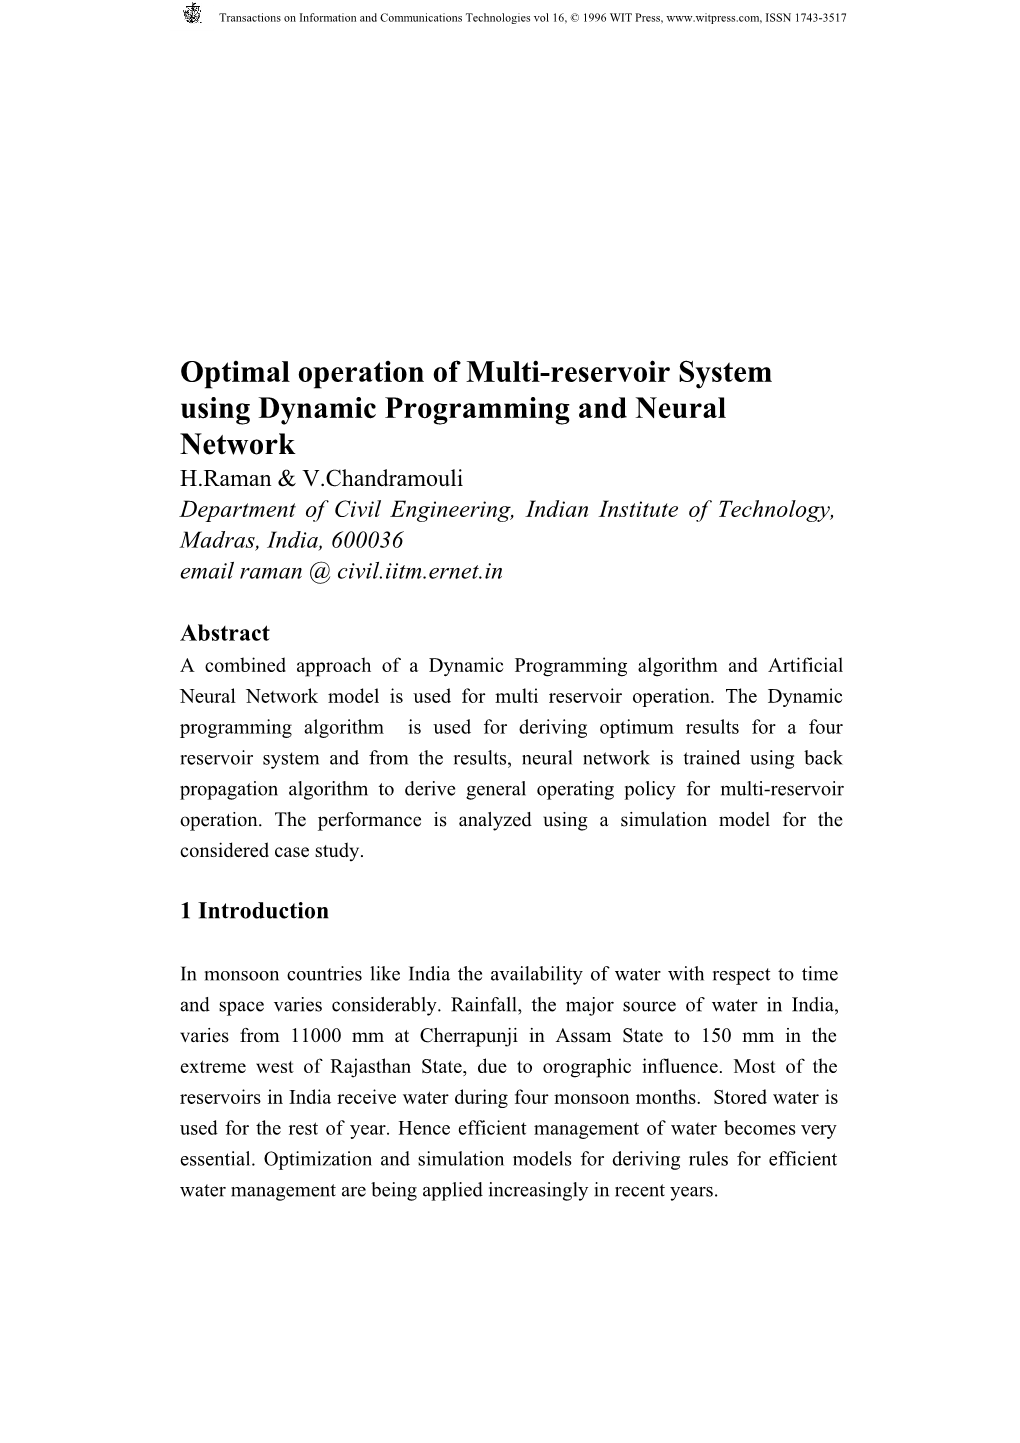 Optimal Operation of Multi-Reservoir System Using Dynamic Programming and Neural